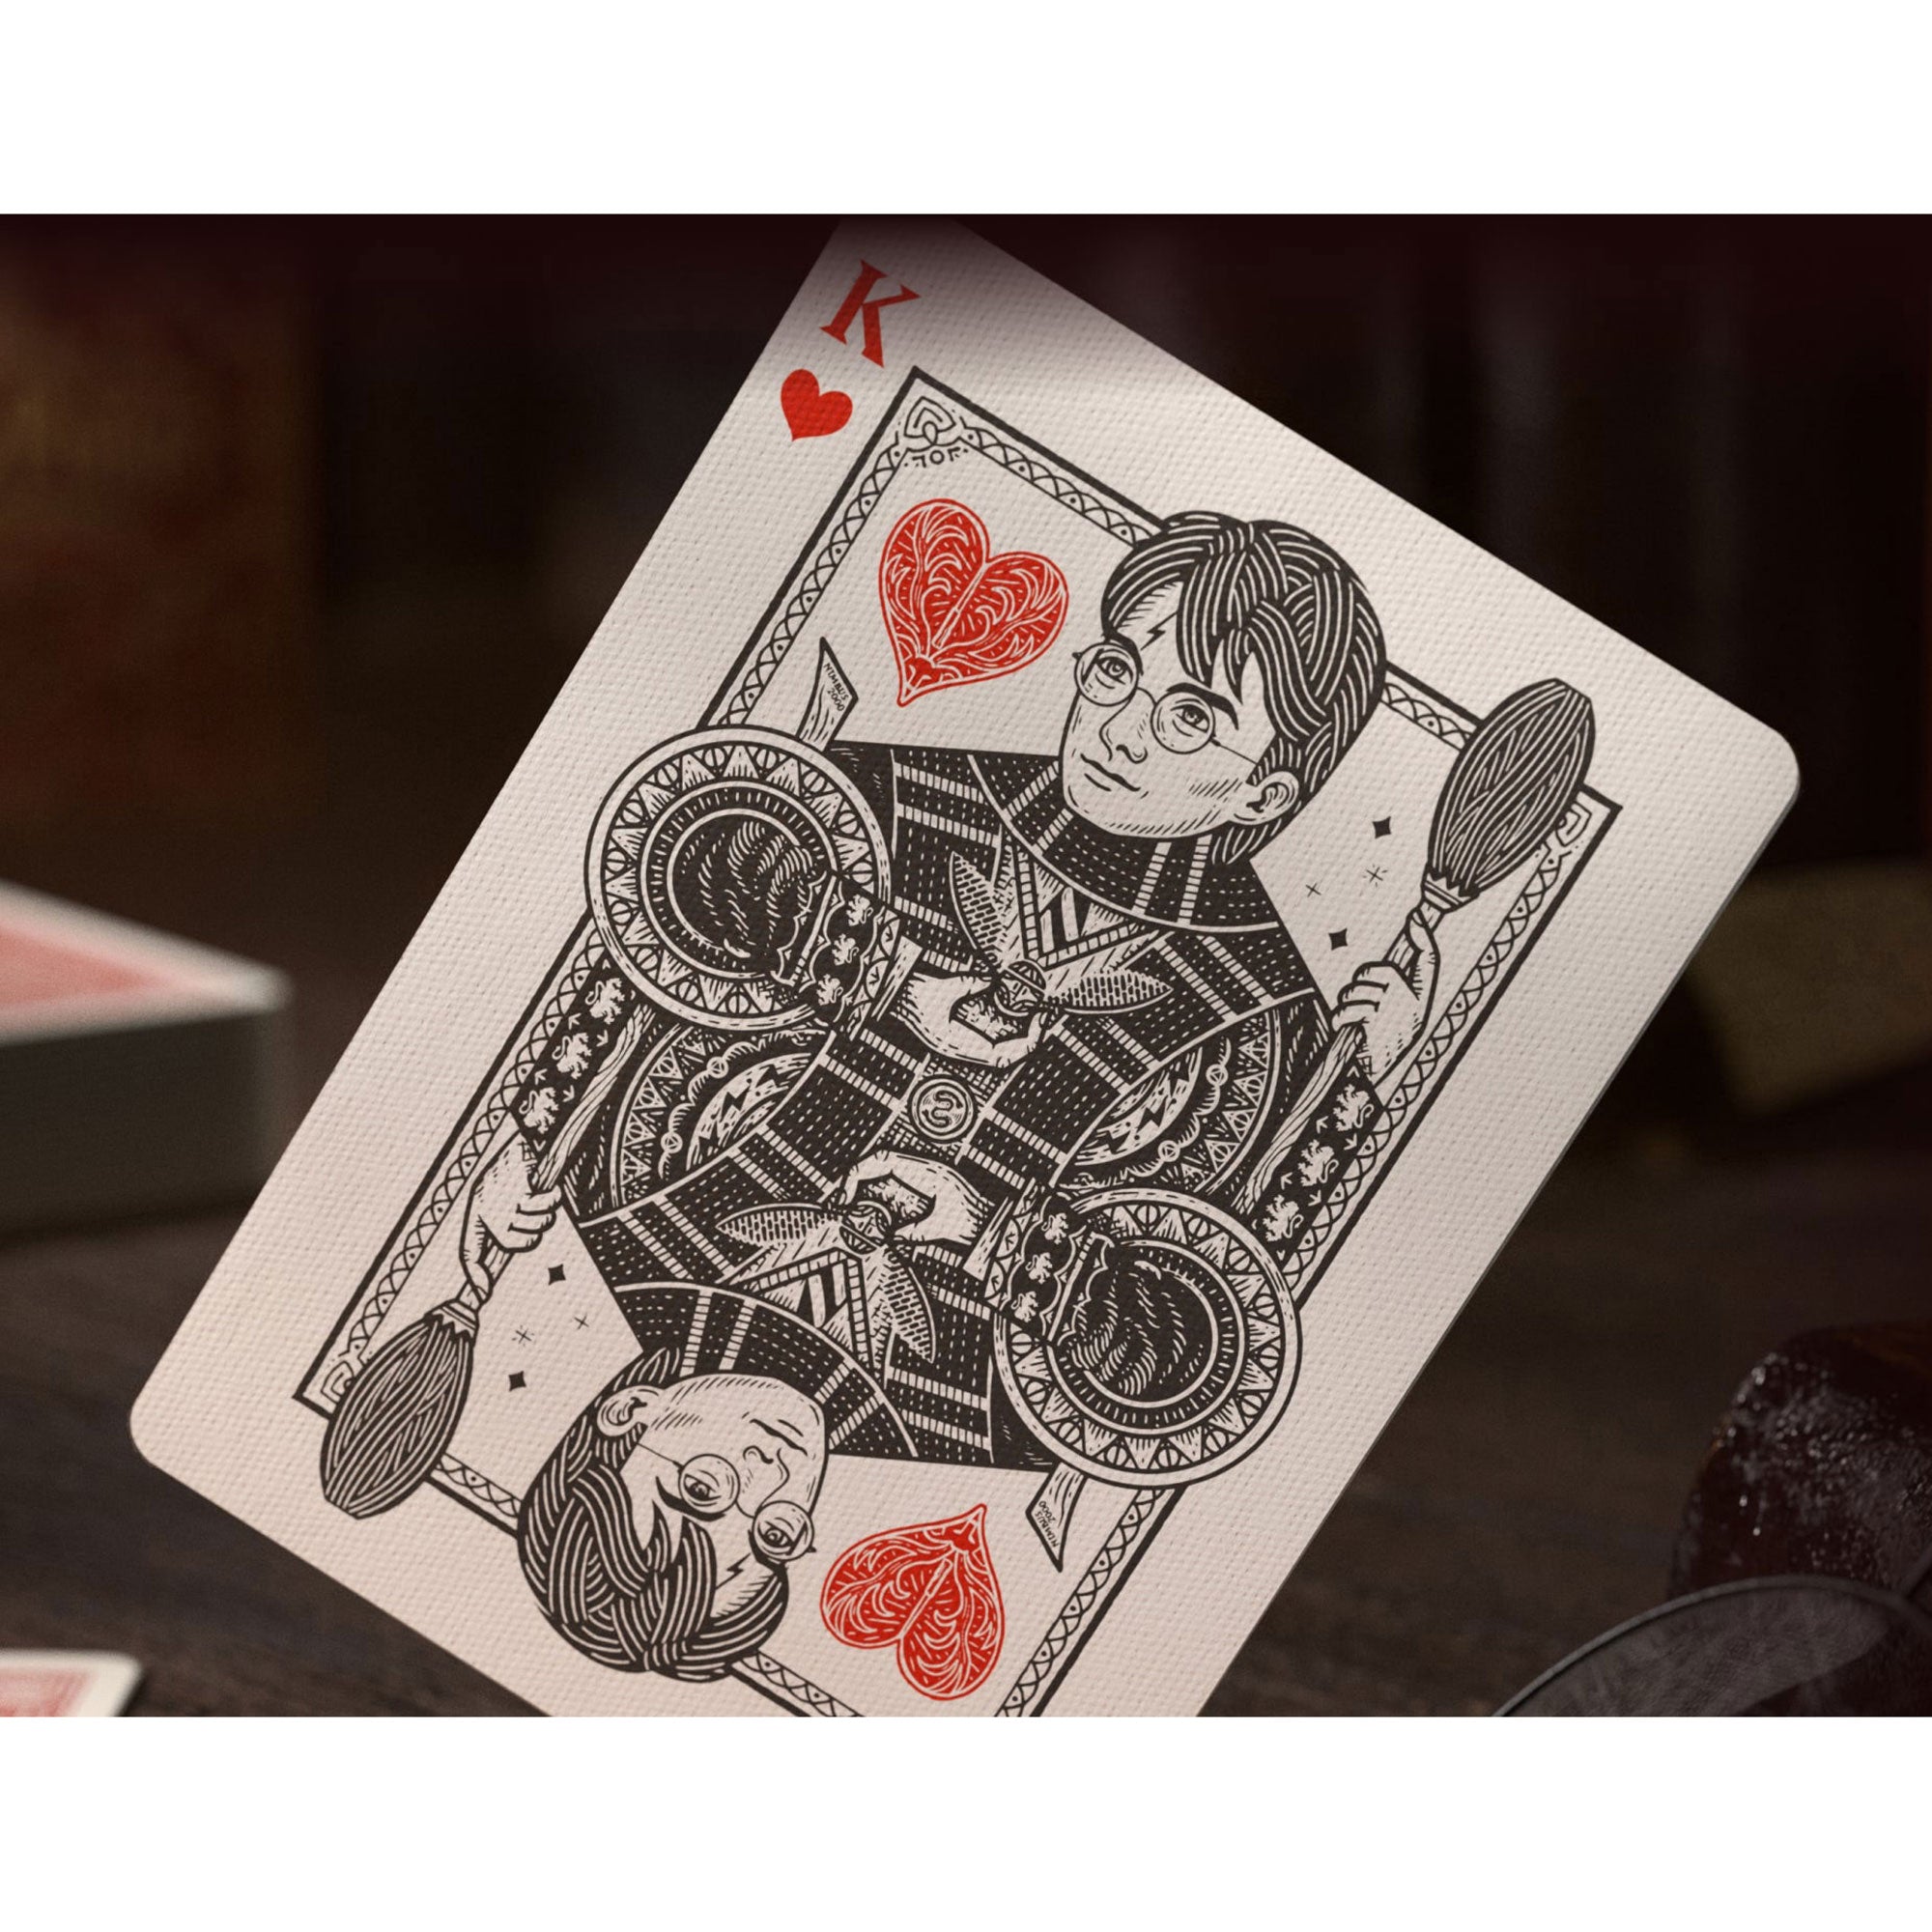 Harry Potter Ravenclaw Playing Cards